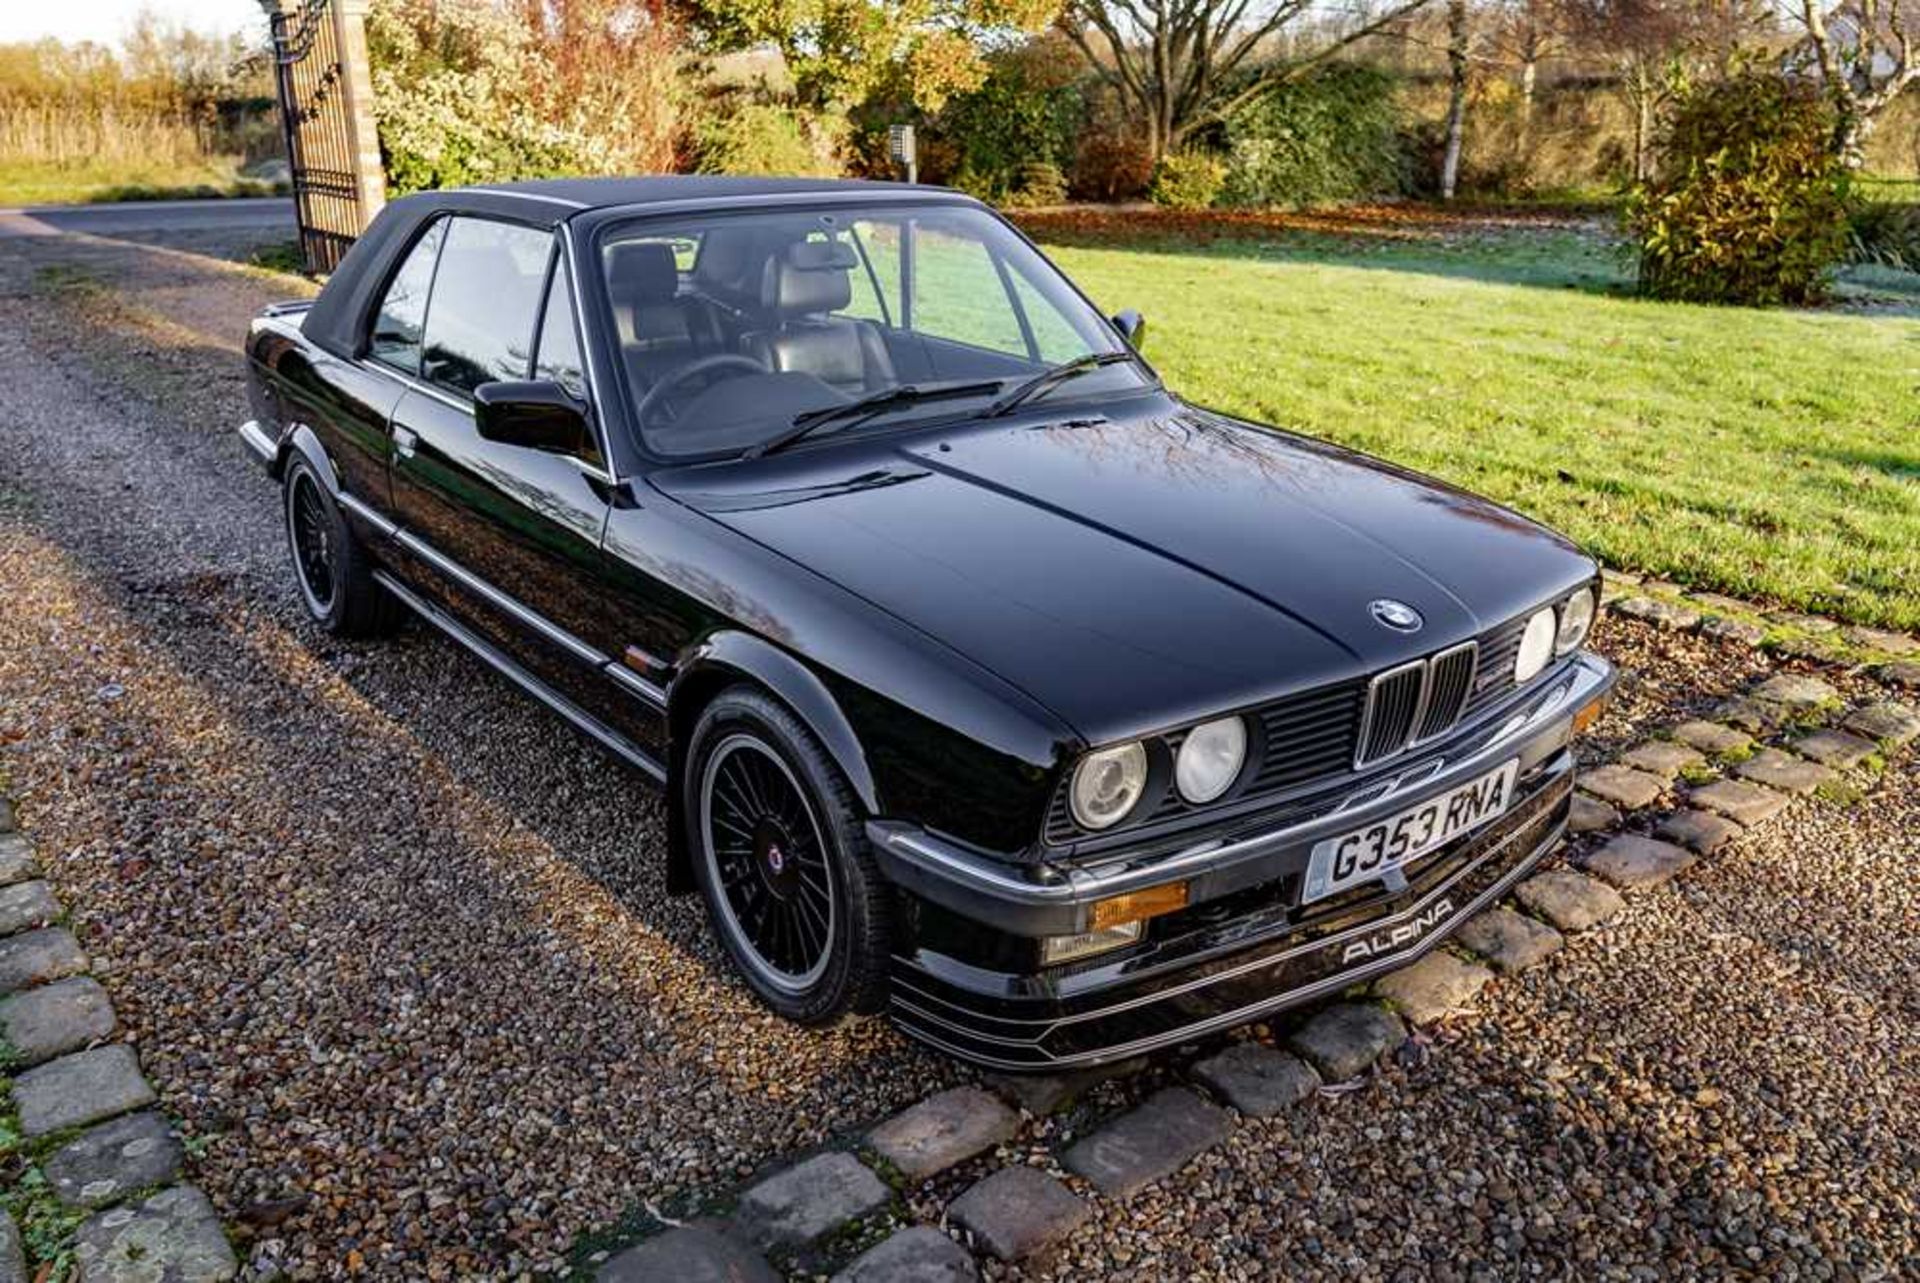 1989 BMW 320i Convertible Converted to Alpina 328i Specification - Image 3 of 51